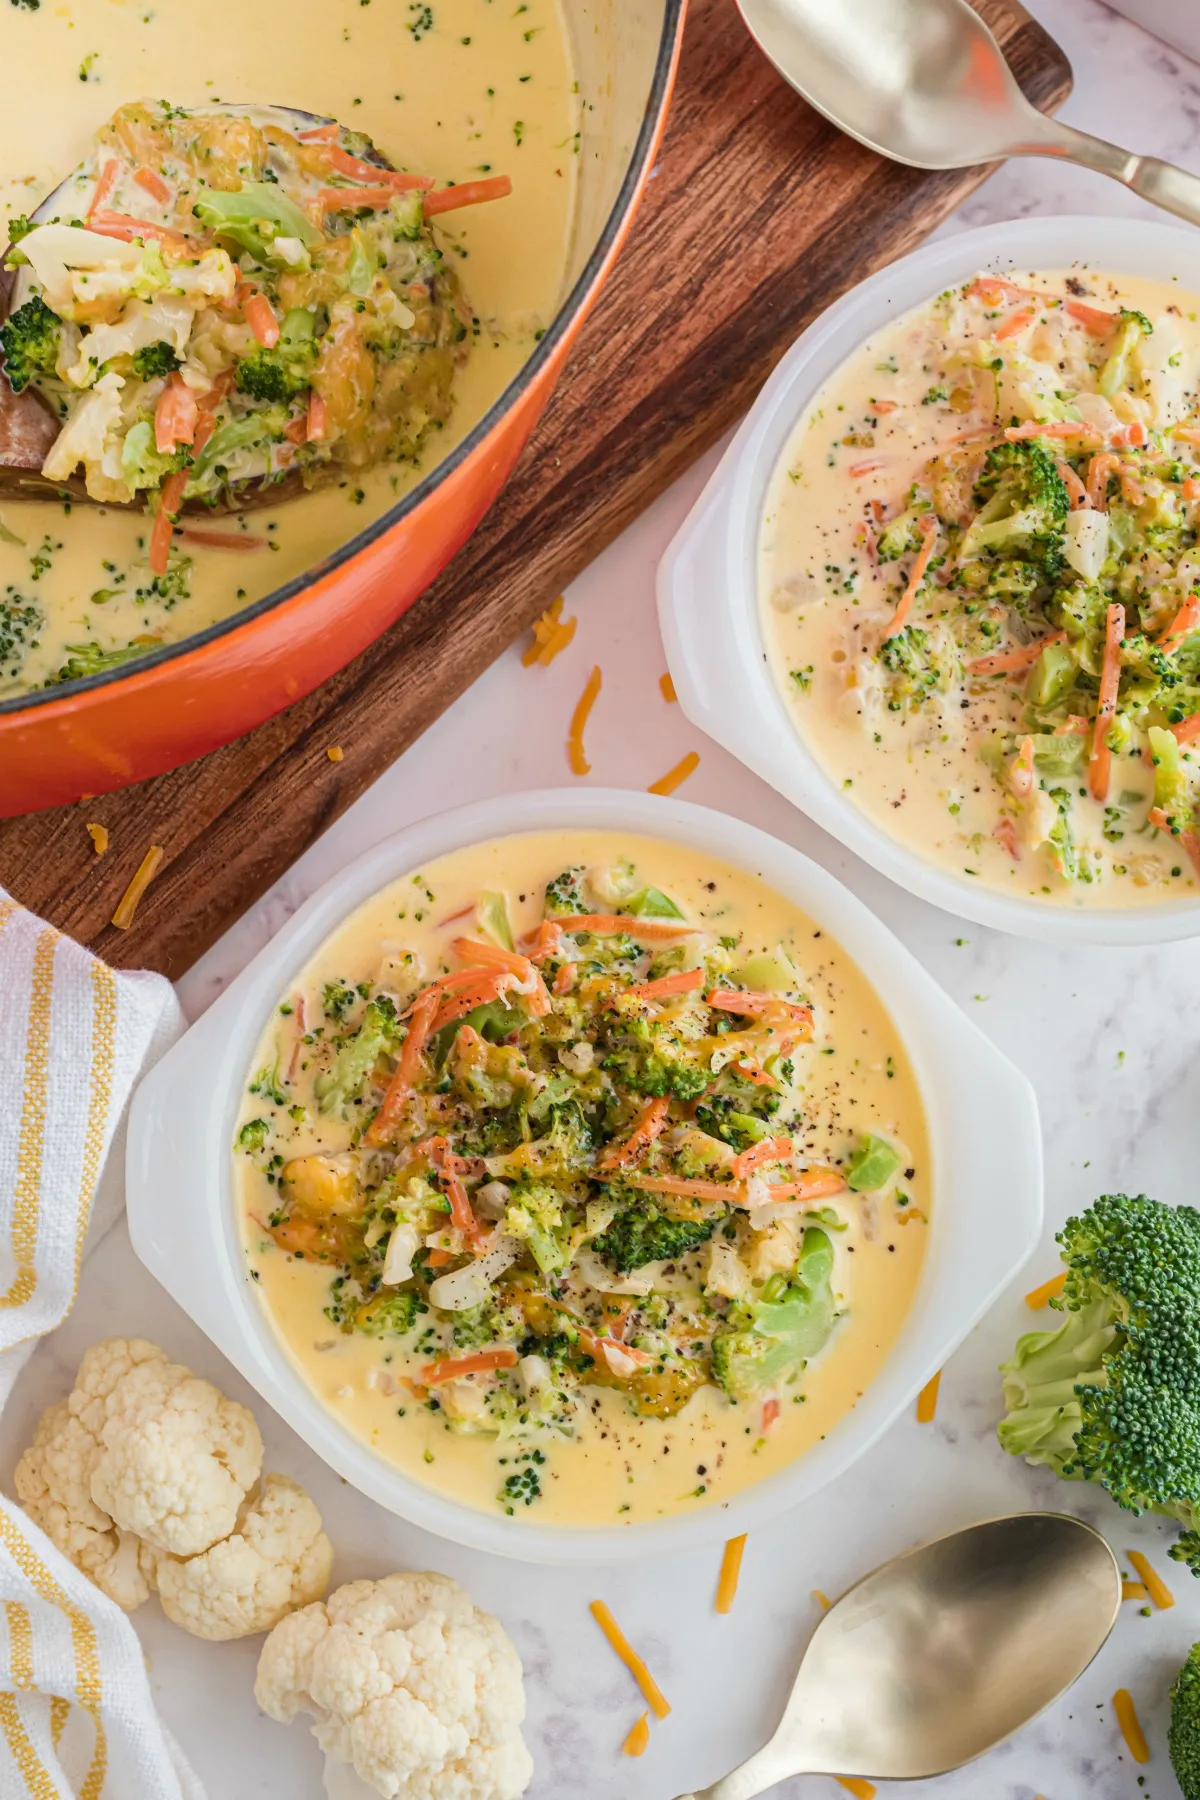 Broccoli cheddar soup served in small bowls.